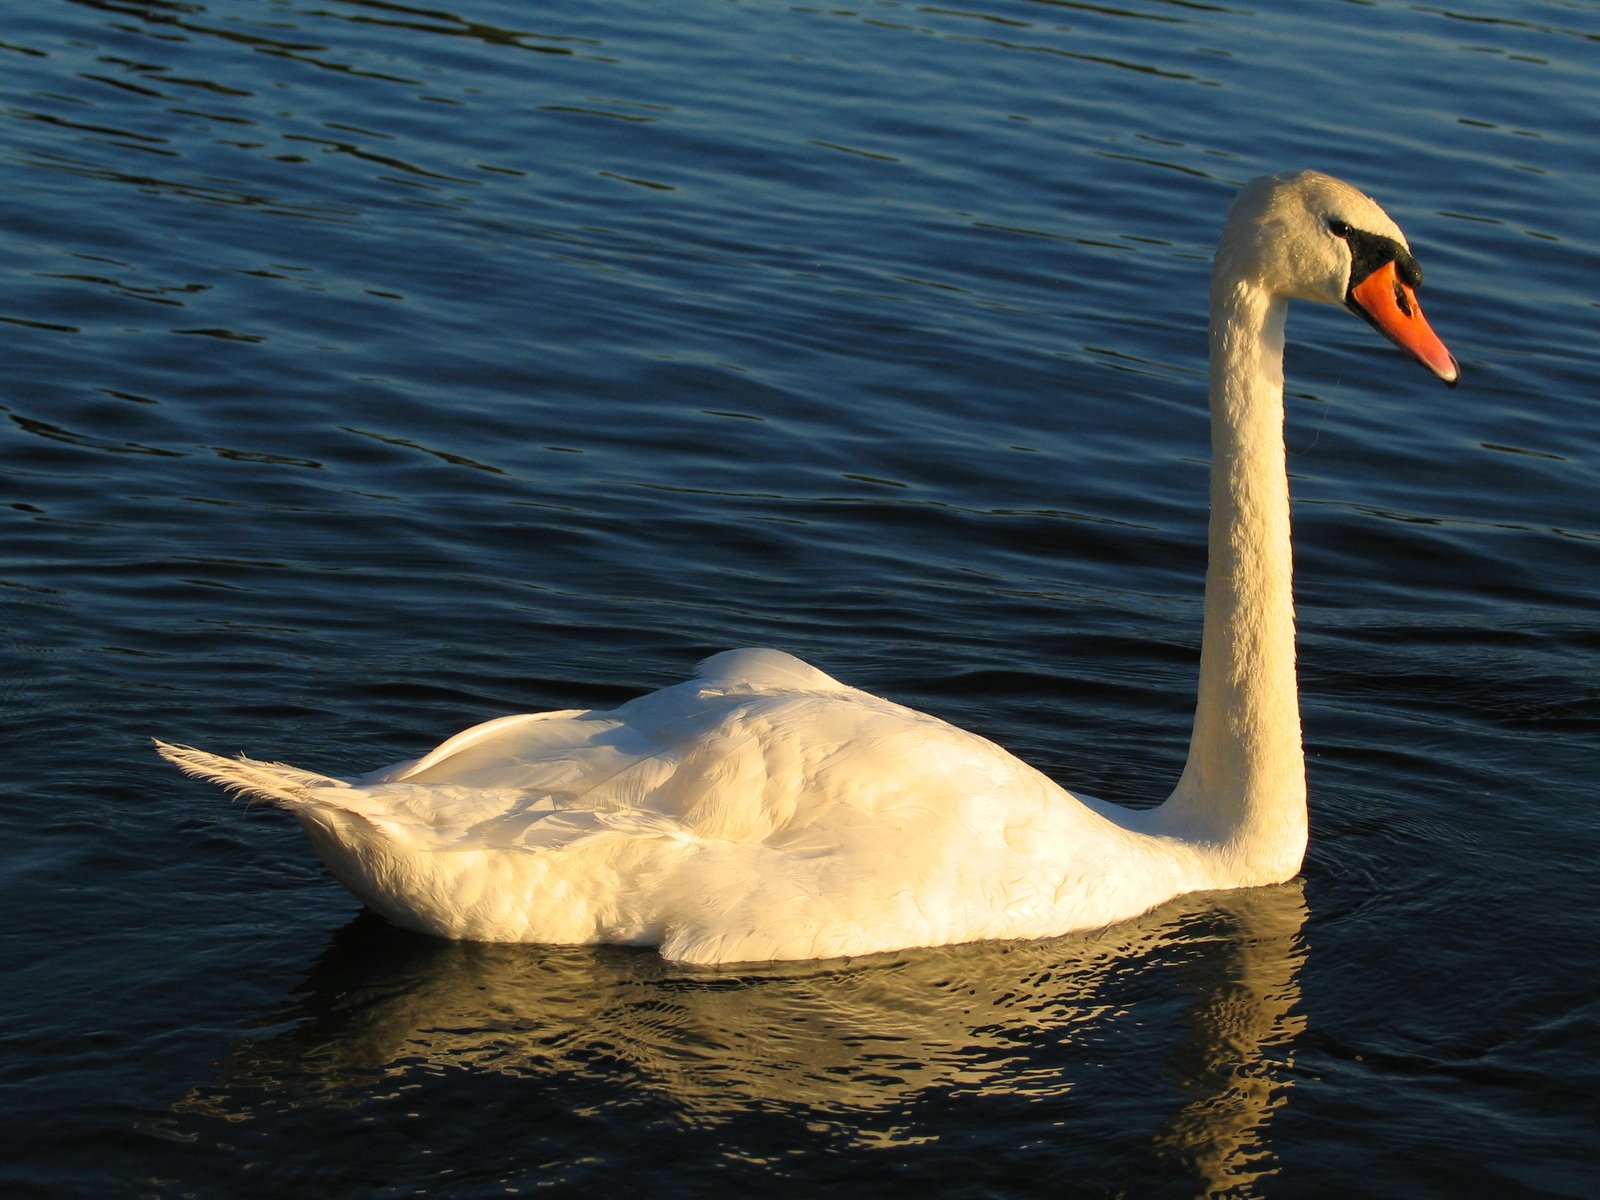 the swan swims in the water and is white